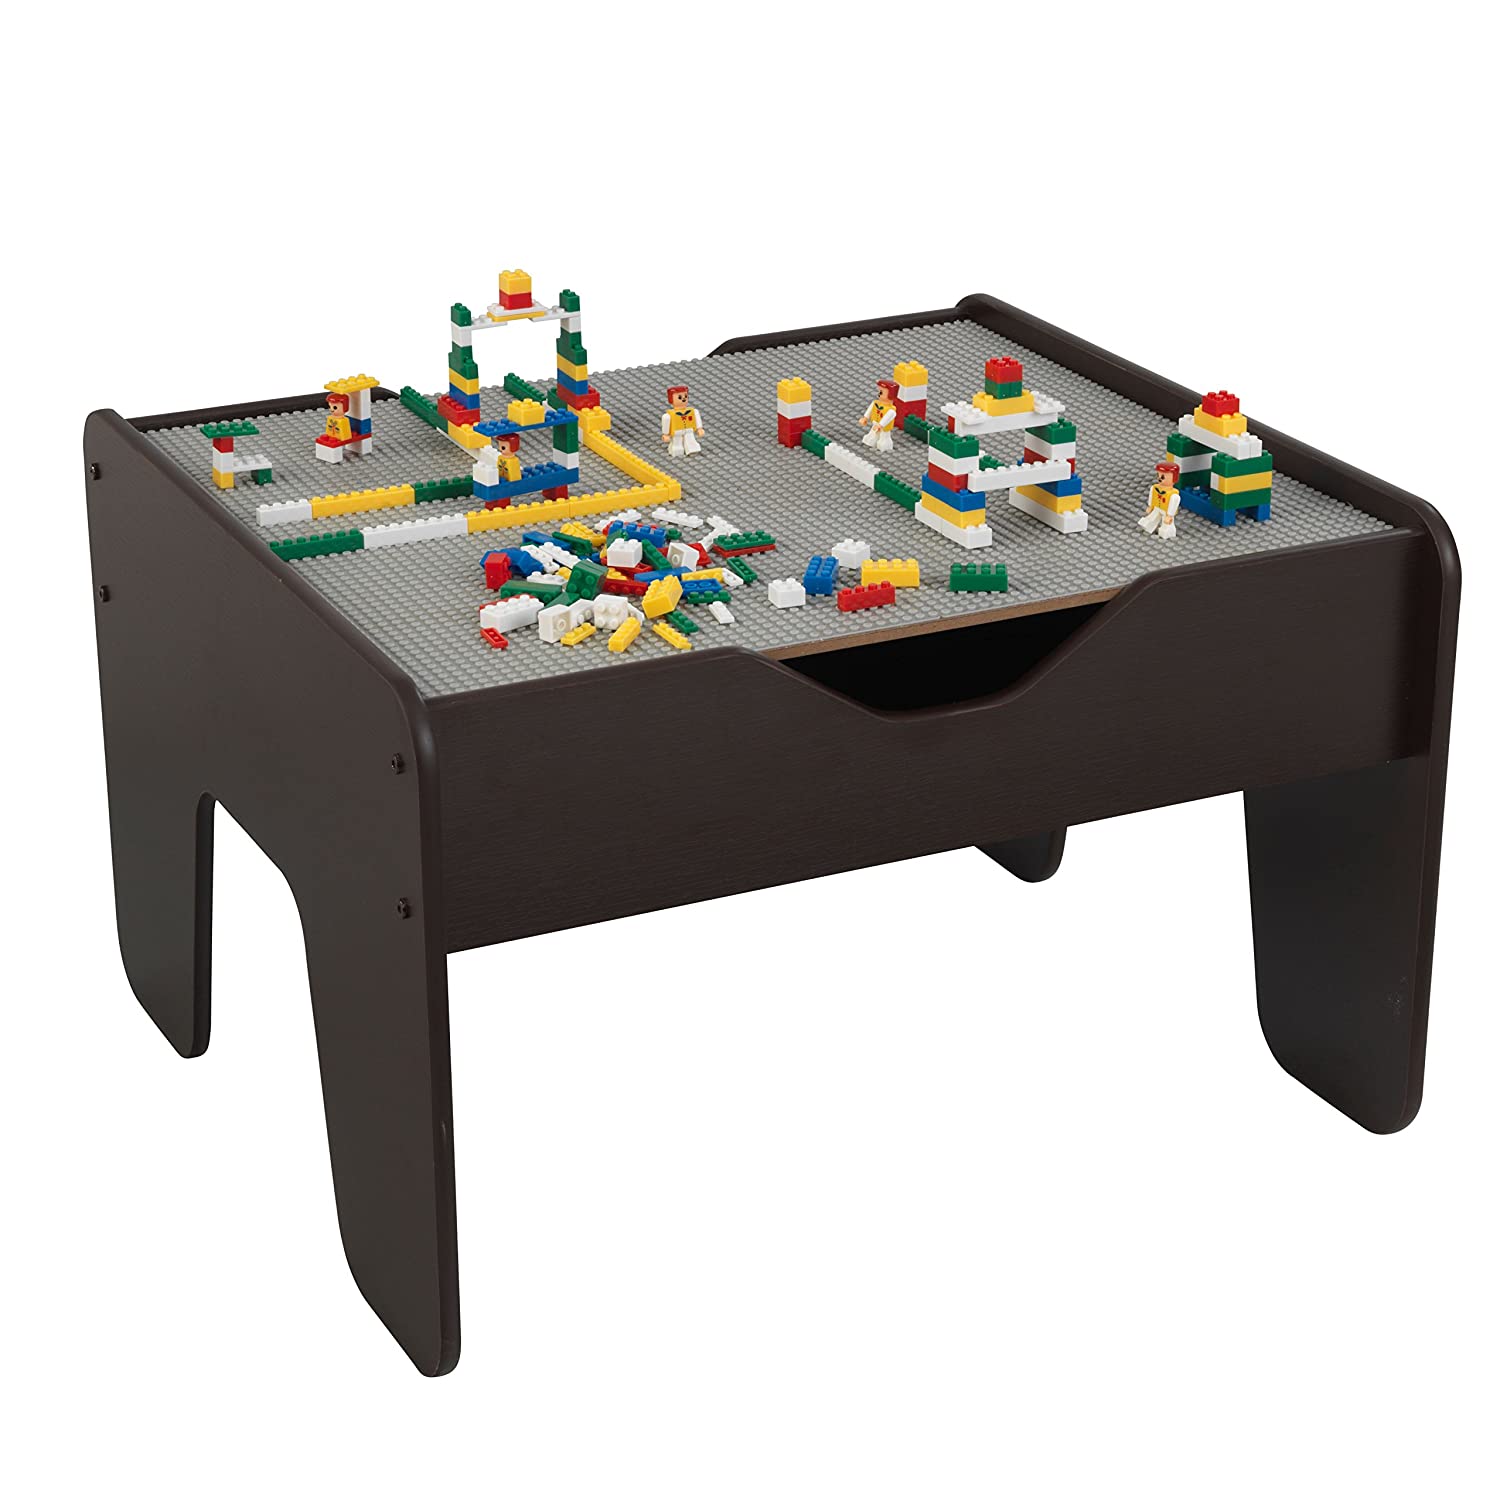 KidKraft 2-in-1 Activity Table with Board